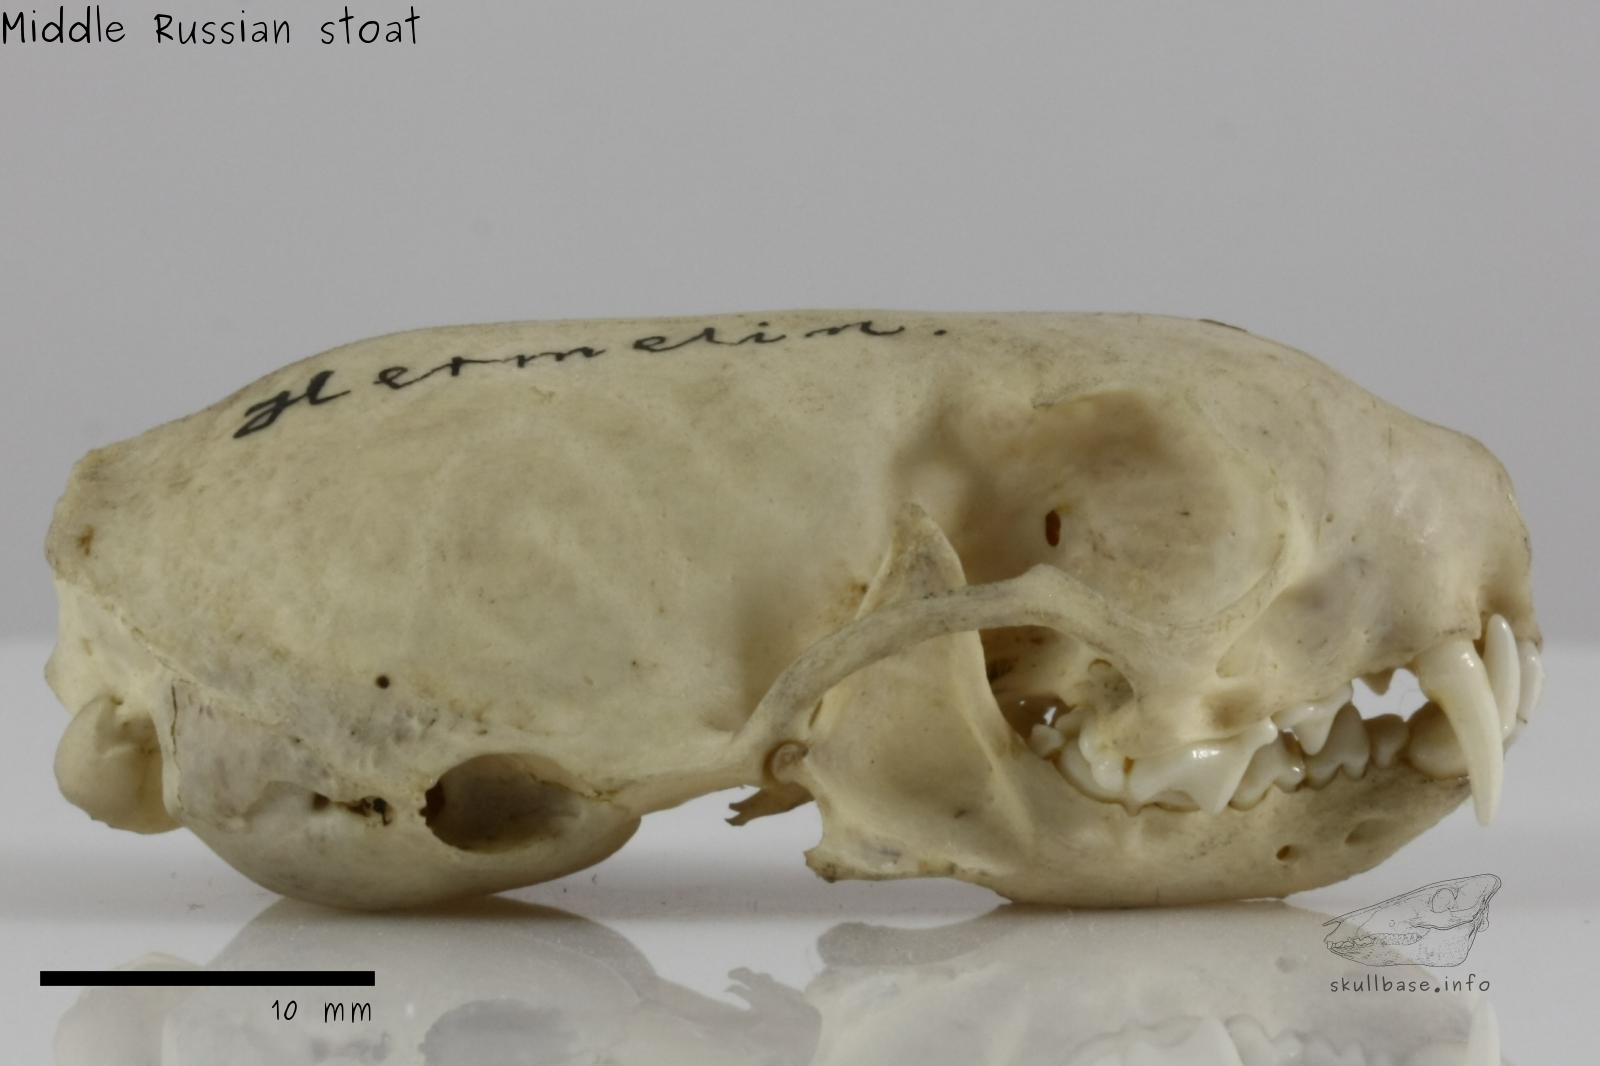 Middle Russian stoat (Mustela erminea aestiva) skull lateral view